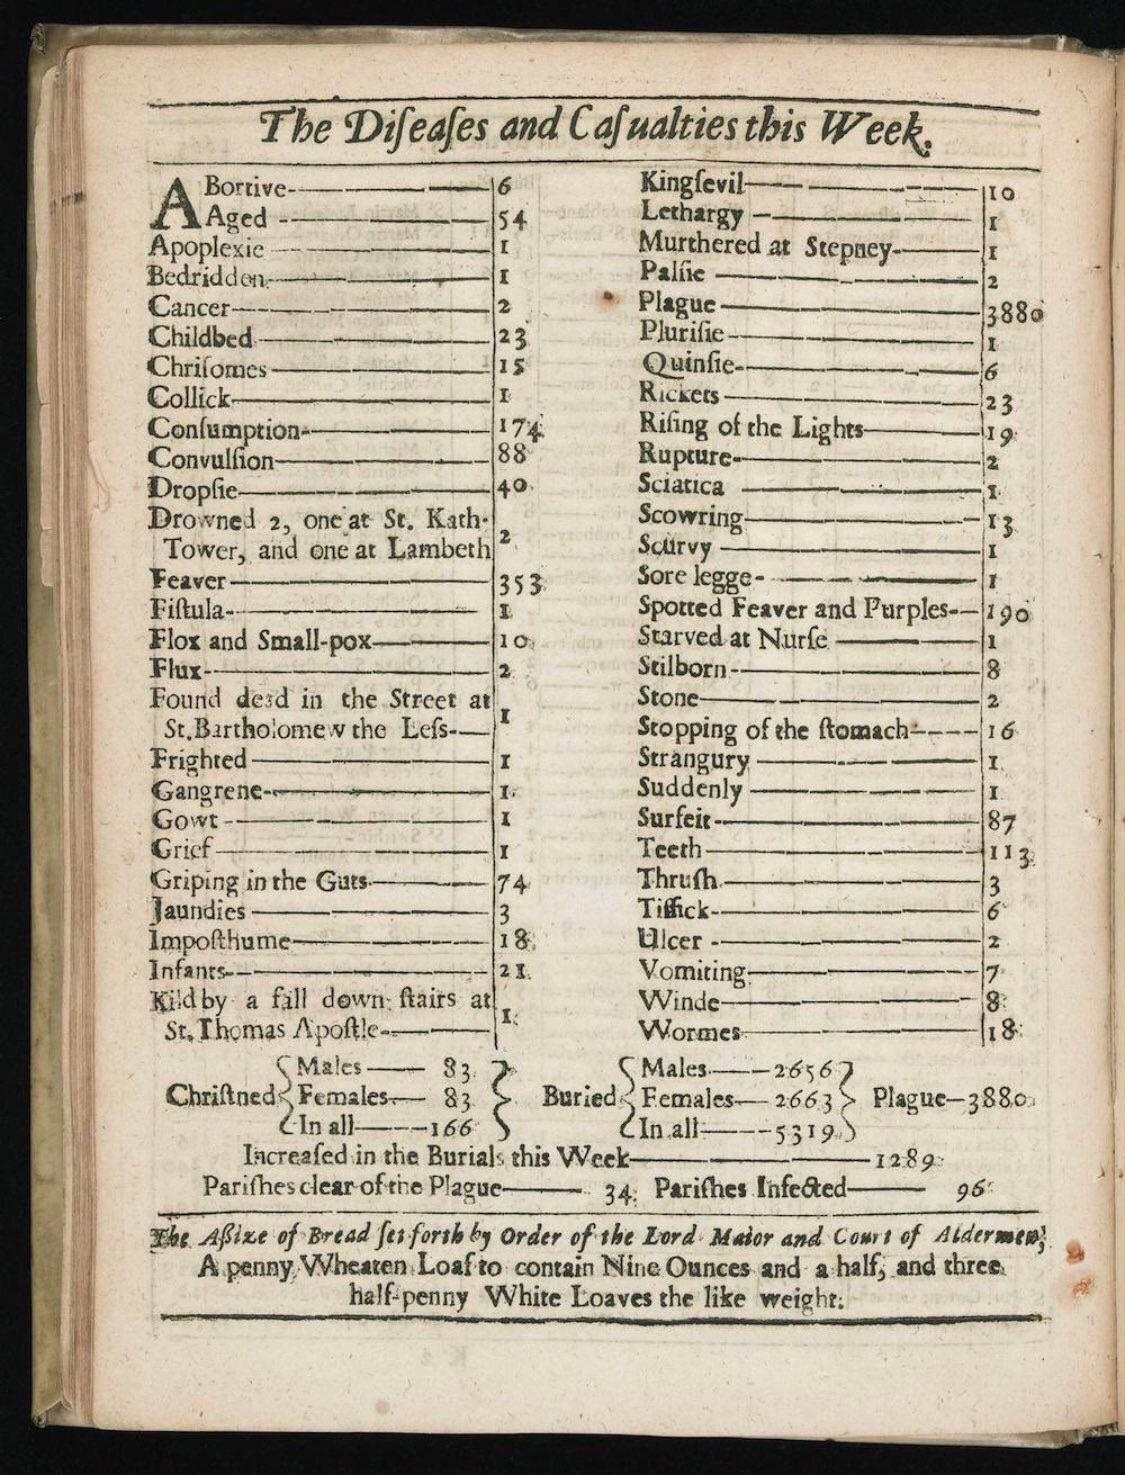 The &quot;deaths and casualties&quot; include &quot;feaver,&quot; &quot;griping in the guts,&quot; &quot;jaundies,&quot; &quot;vomiting,&quot; &quot;wormes,&quot; &quot;suddenly,&quot; &quot;strangury,&quot; &quot;scurvy,&quot; sore legge,&quot; &quot;sciatica,&quot; rupture,&quot; &quot;rickets,&quot; &quot;quinine,&quot; &quot;lethargy,&quot; &quot;plague,&quot; &quot;aged,&quot; and &quot;stopping of the stomach&quot;